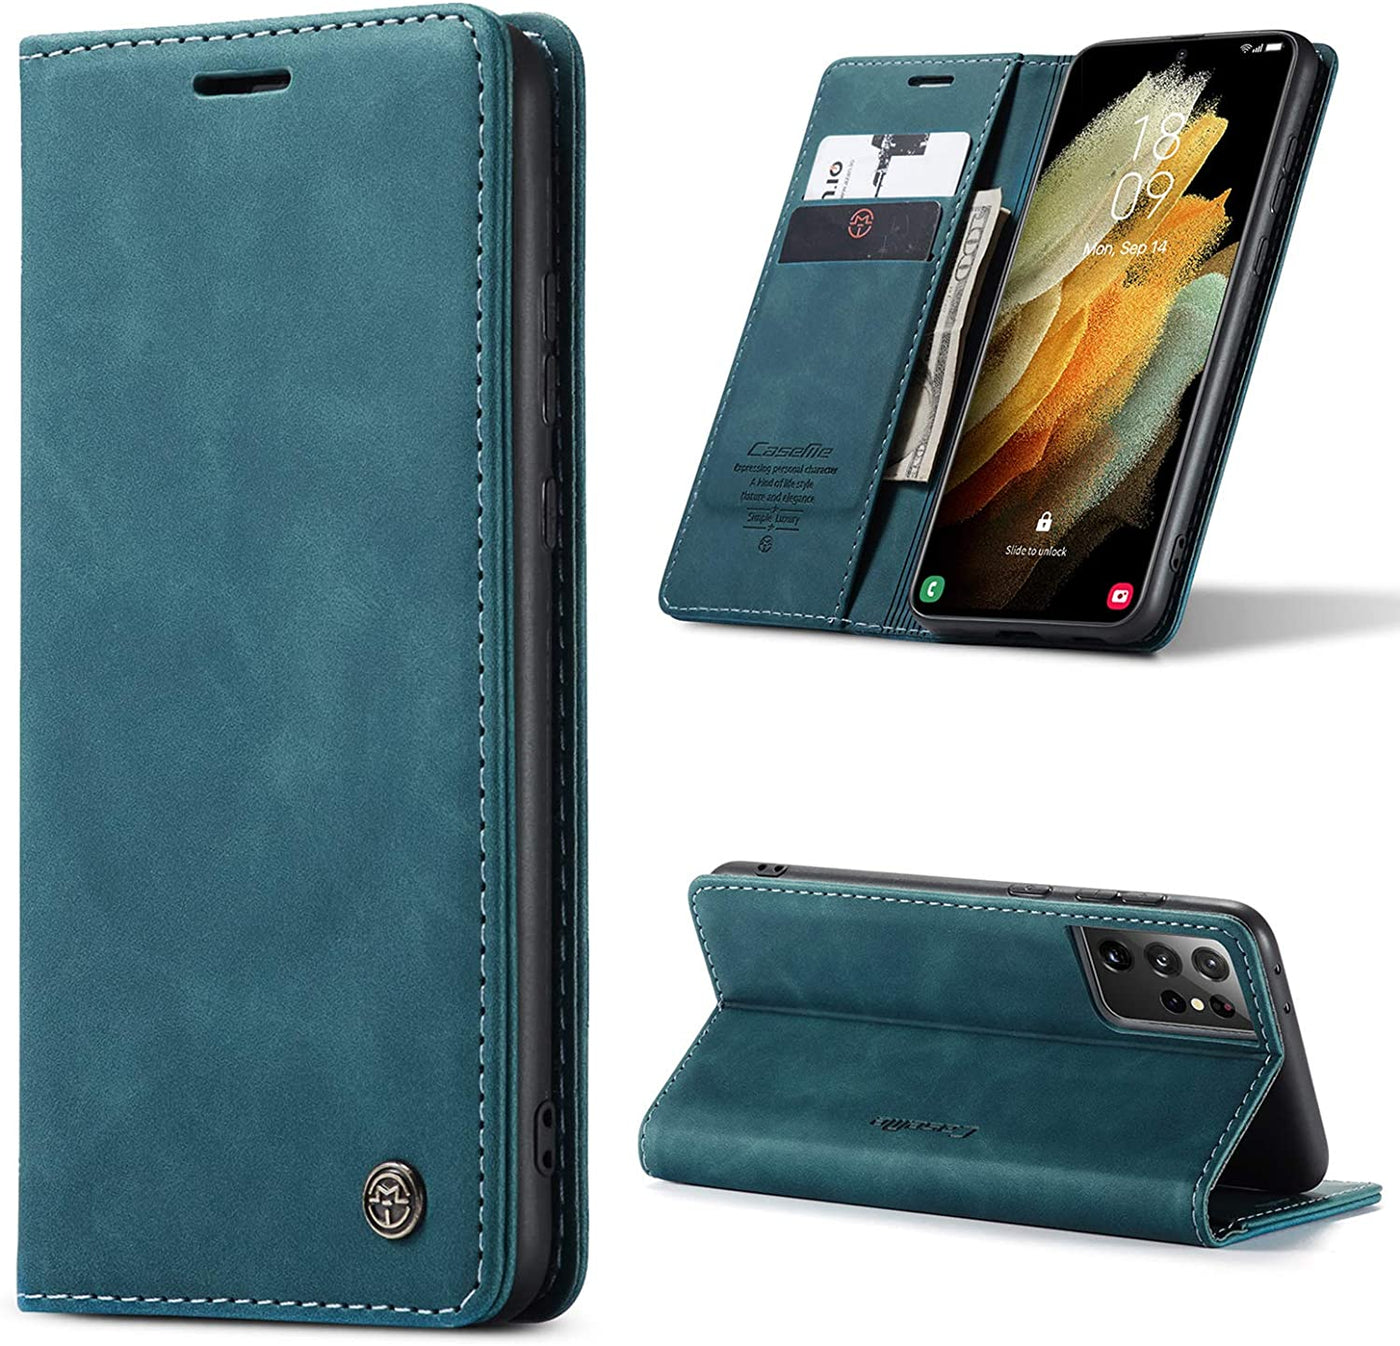 Excelsior Premium Leather Wallet flip Cover Case For Samsung Galaxy S21 Ultra